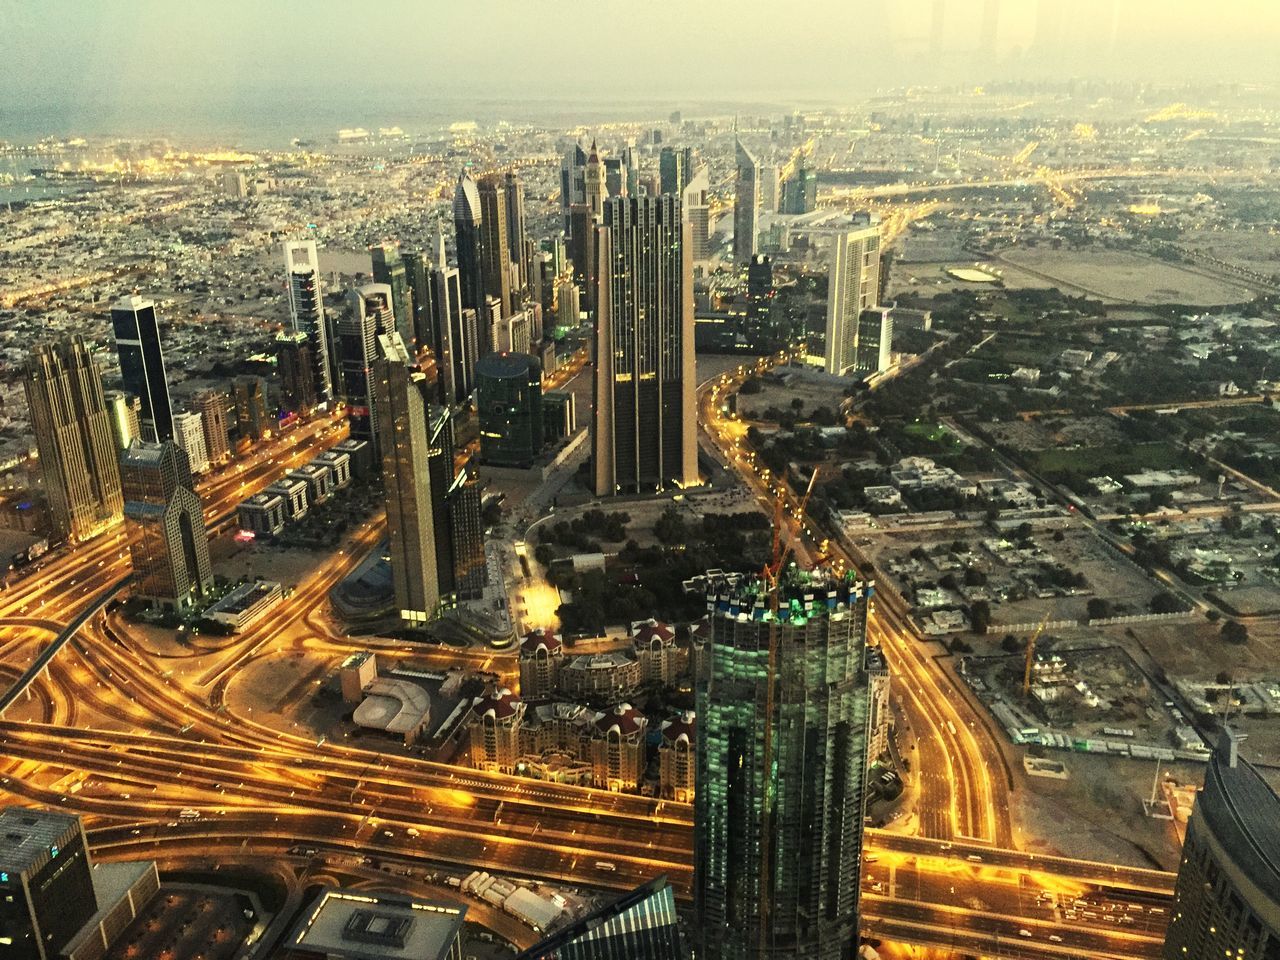 city, architecture, cityscape, building exterior, built structure, skyscraper, aerial view, high angle view, tall - high, crowded, tower, illuminated, modern, capital cities, office building, financial district, city life, travel destinations, night, famous place